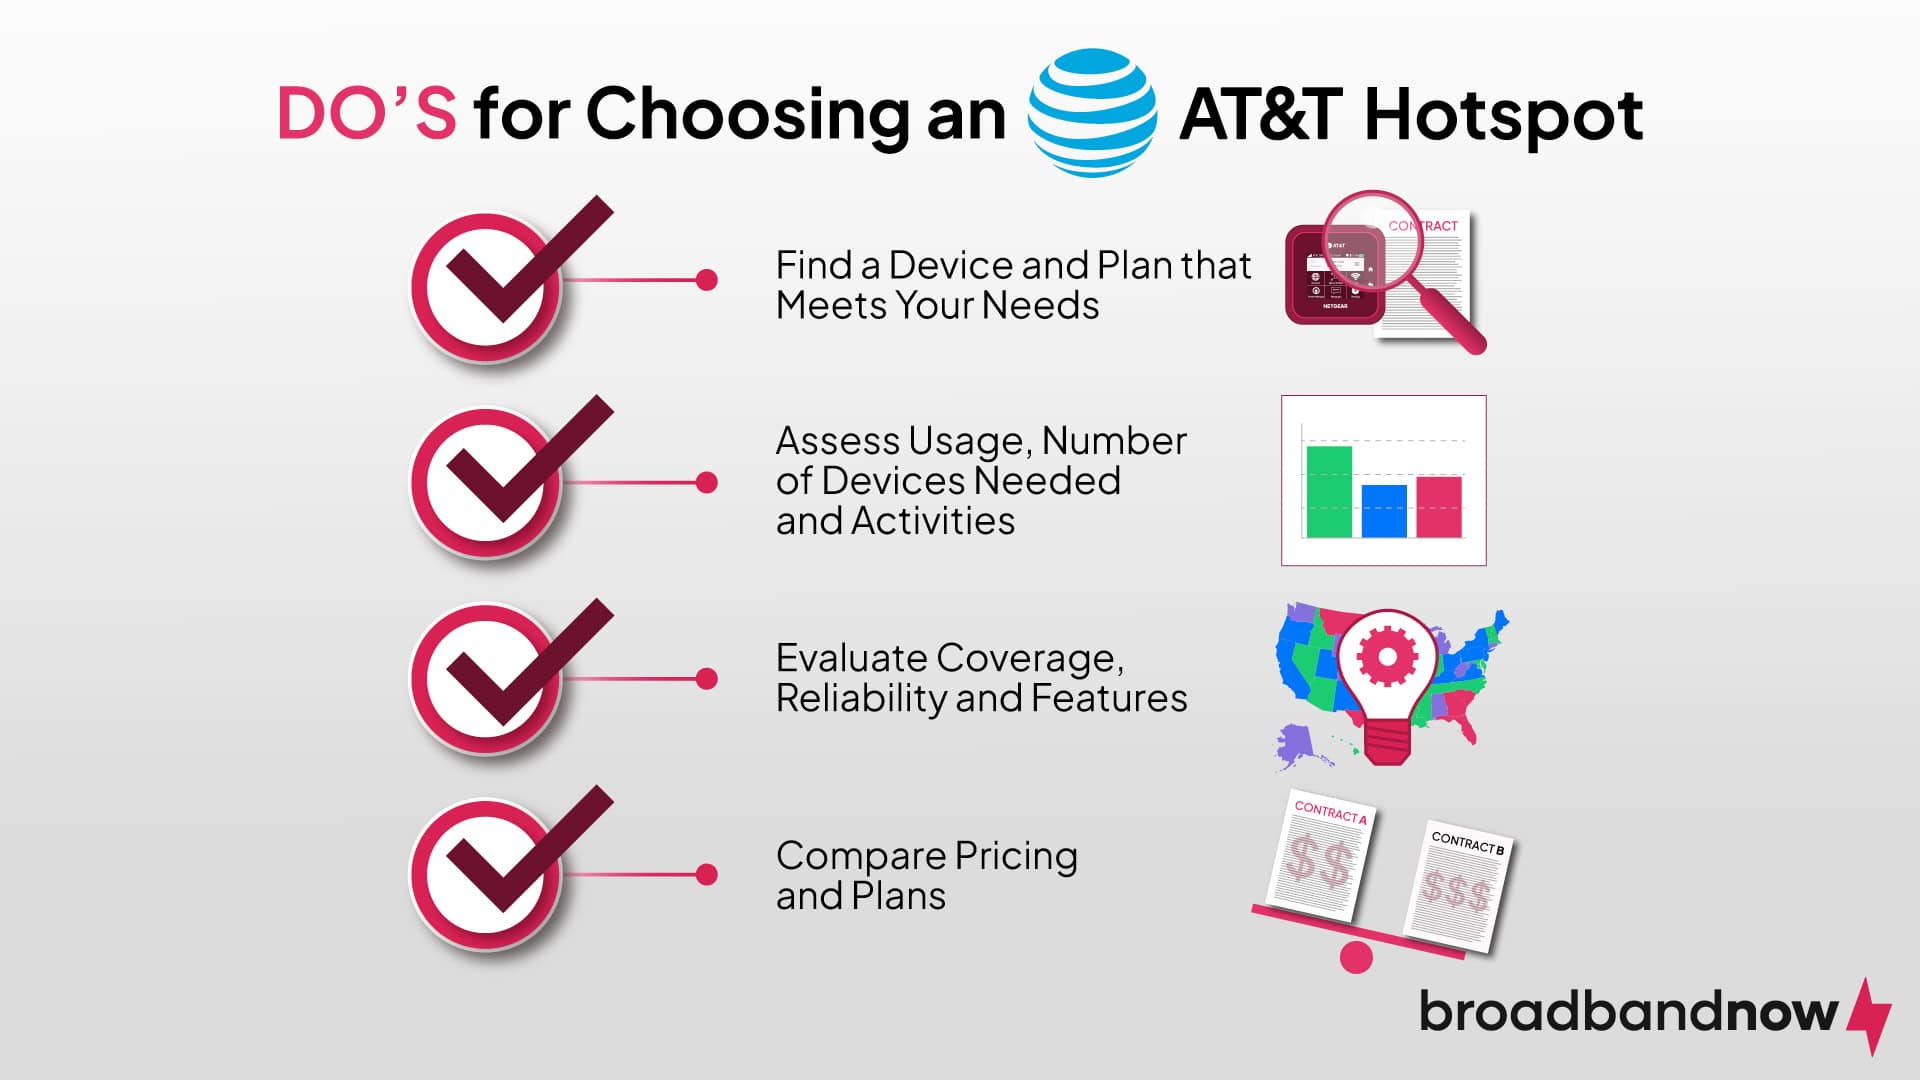 A graphic of a checklist for what to do when choosing an AT&T hotspot.